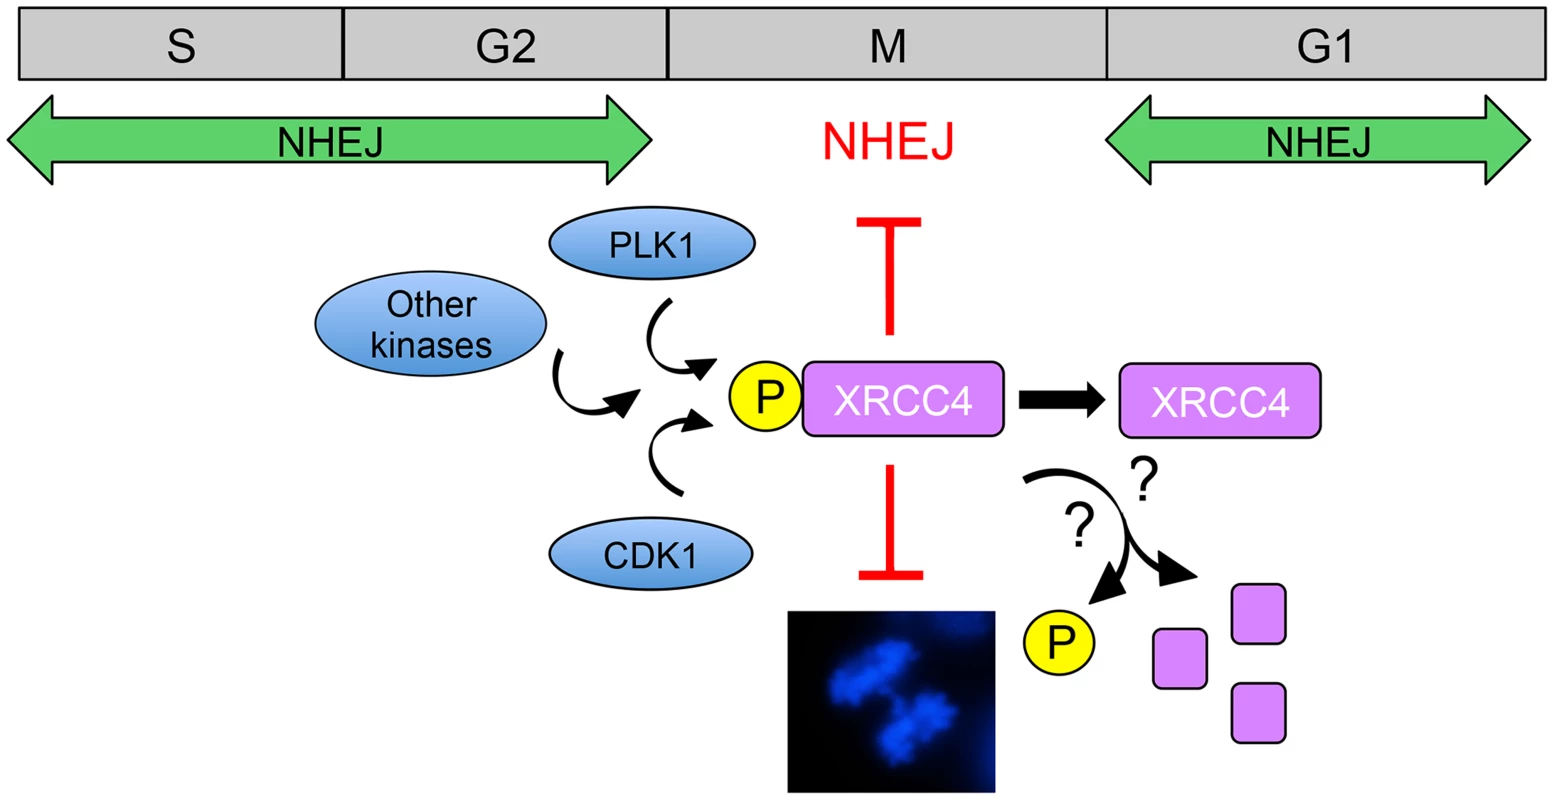 Model for suppression of NHEJ in mitosis by phosphorylated XRCC4.